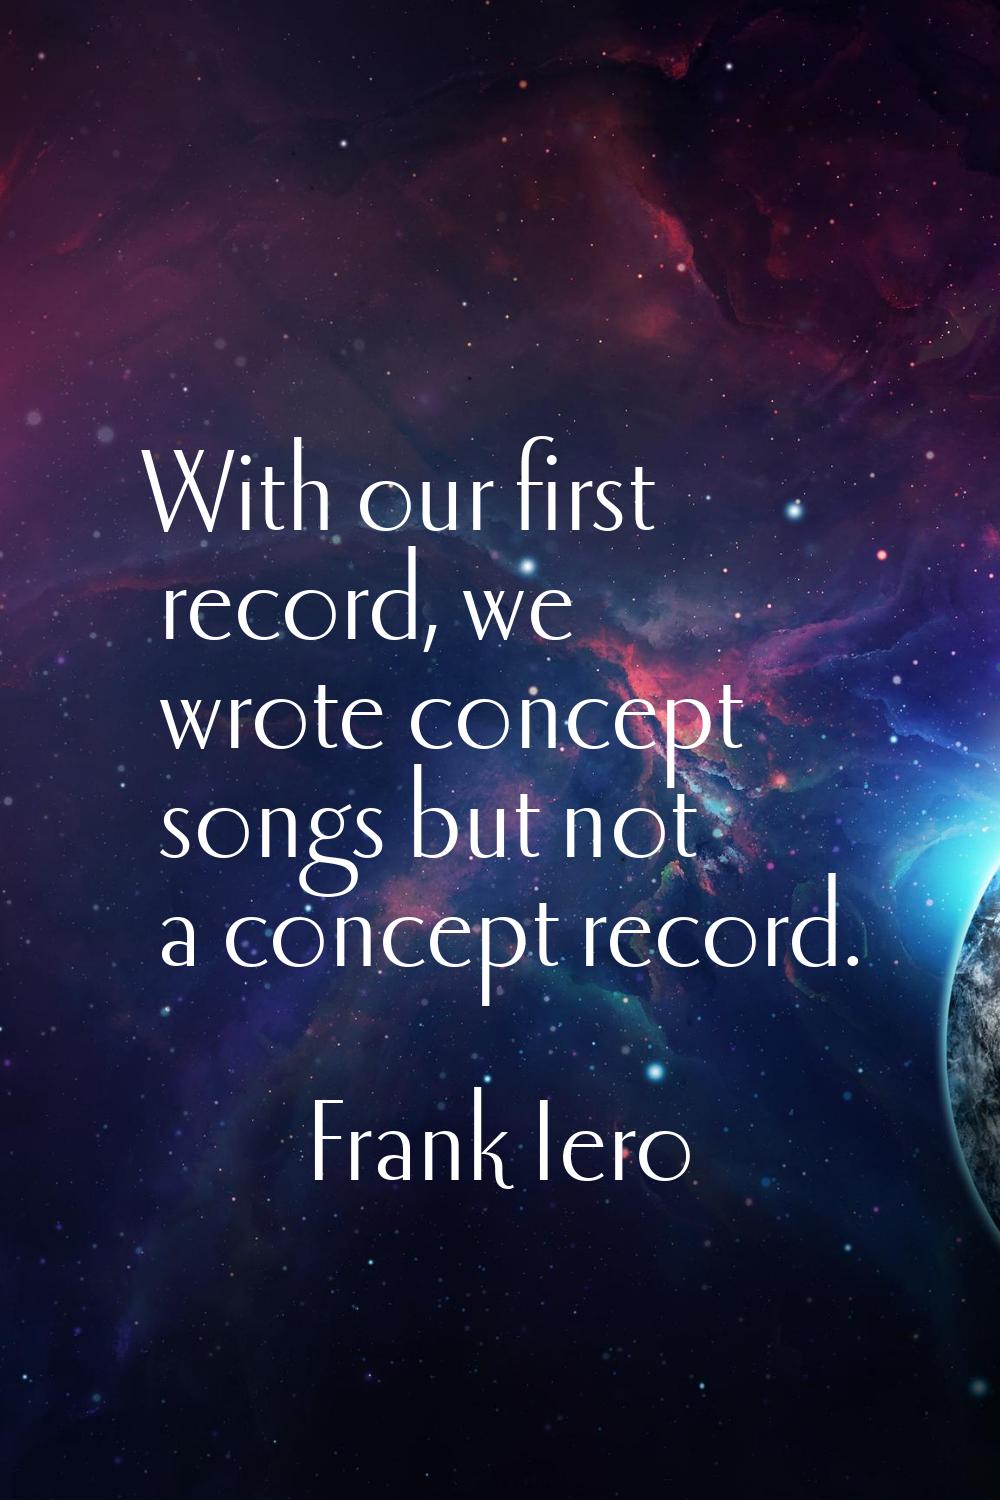 With our first record, we wrote concept songs but not a concept record.